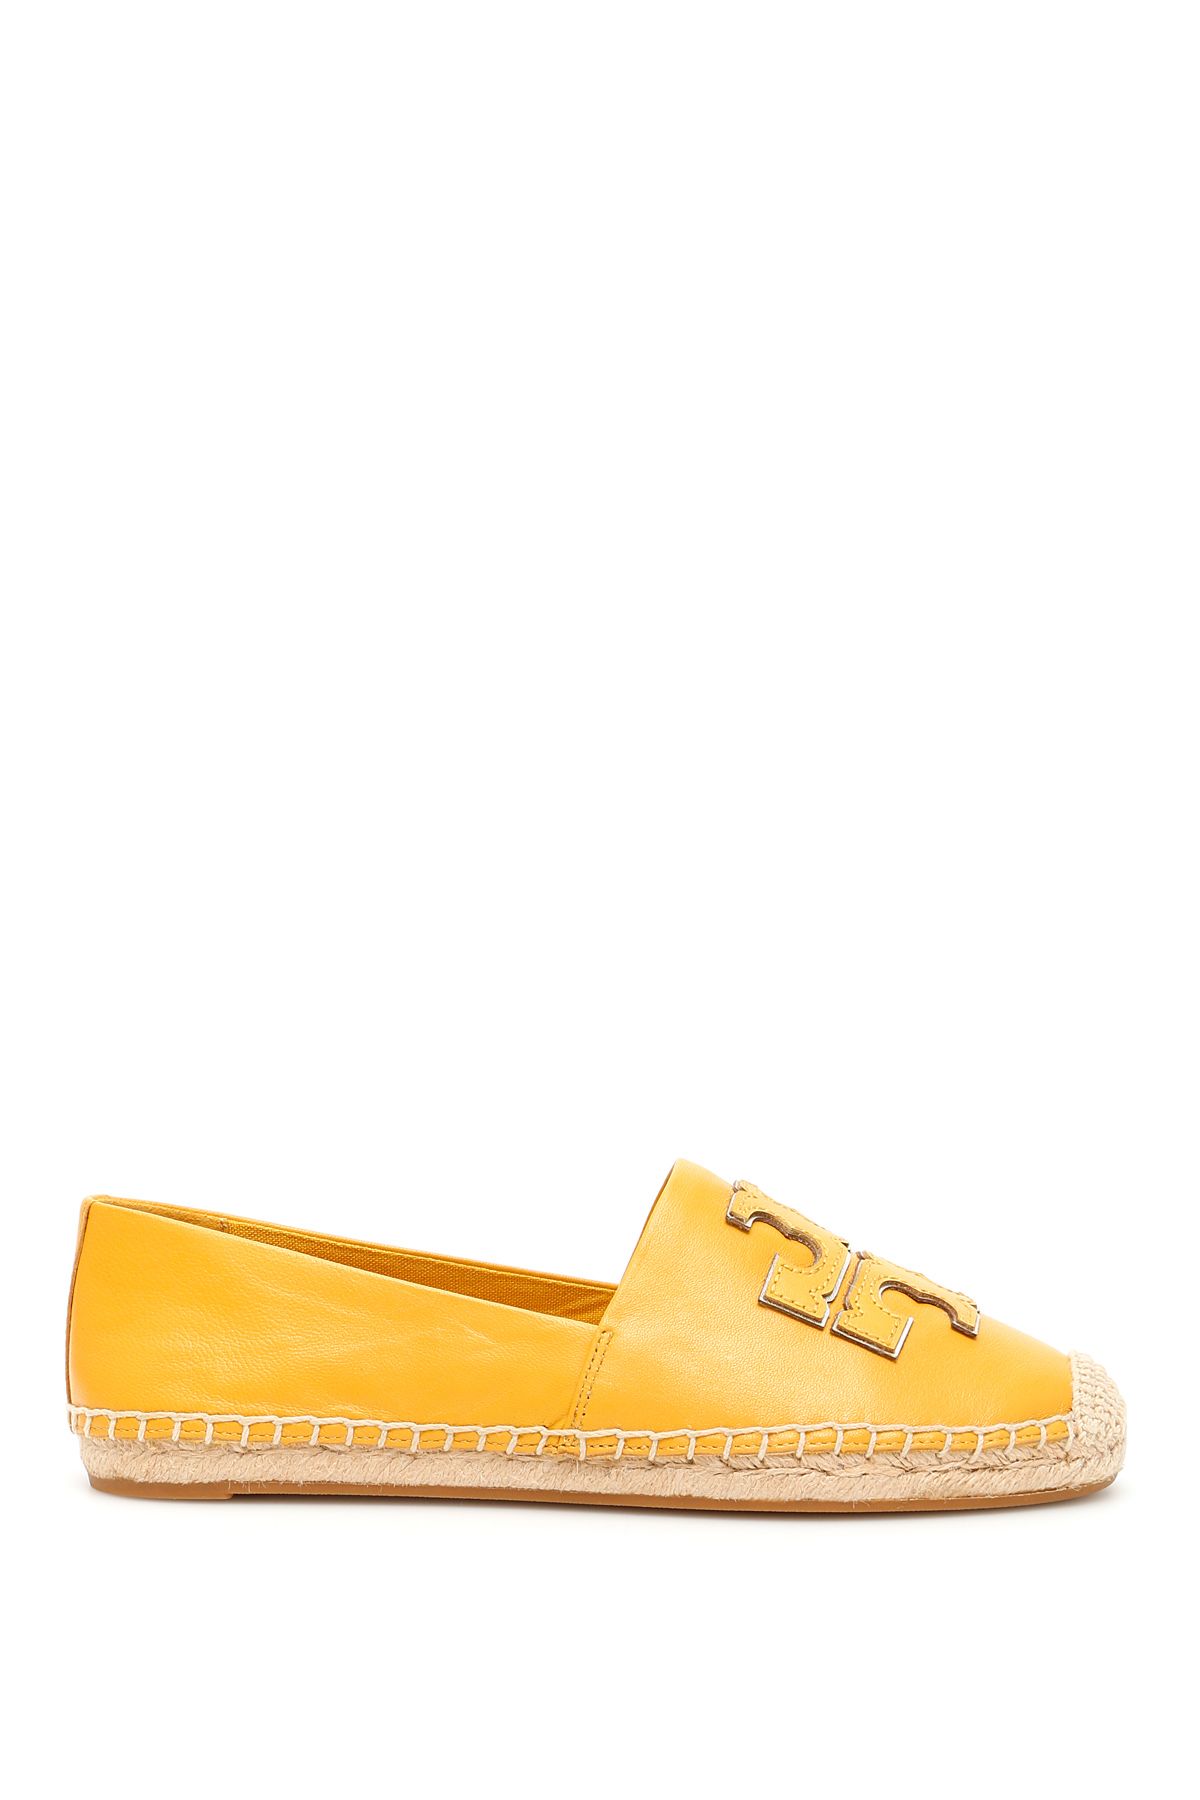 TORY BURCH INES LEATHER ESPADRILLES,10870202